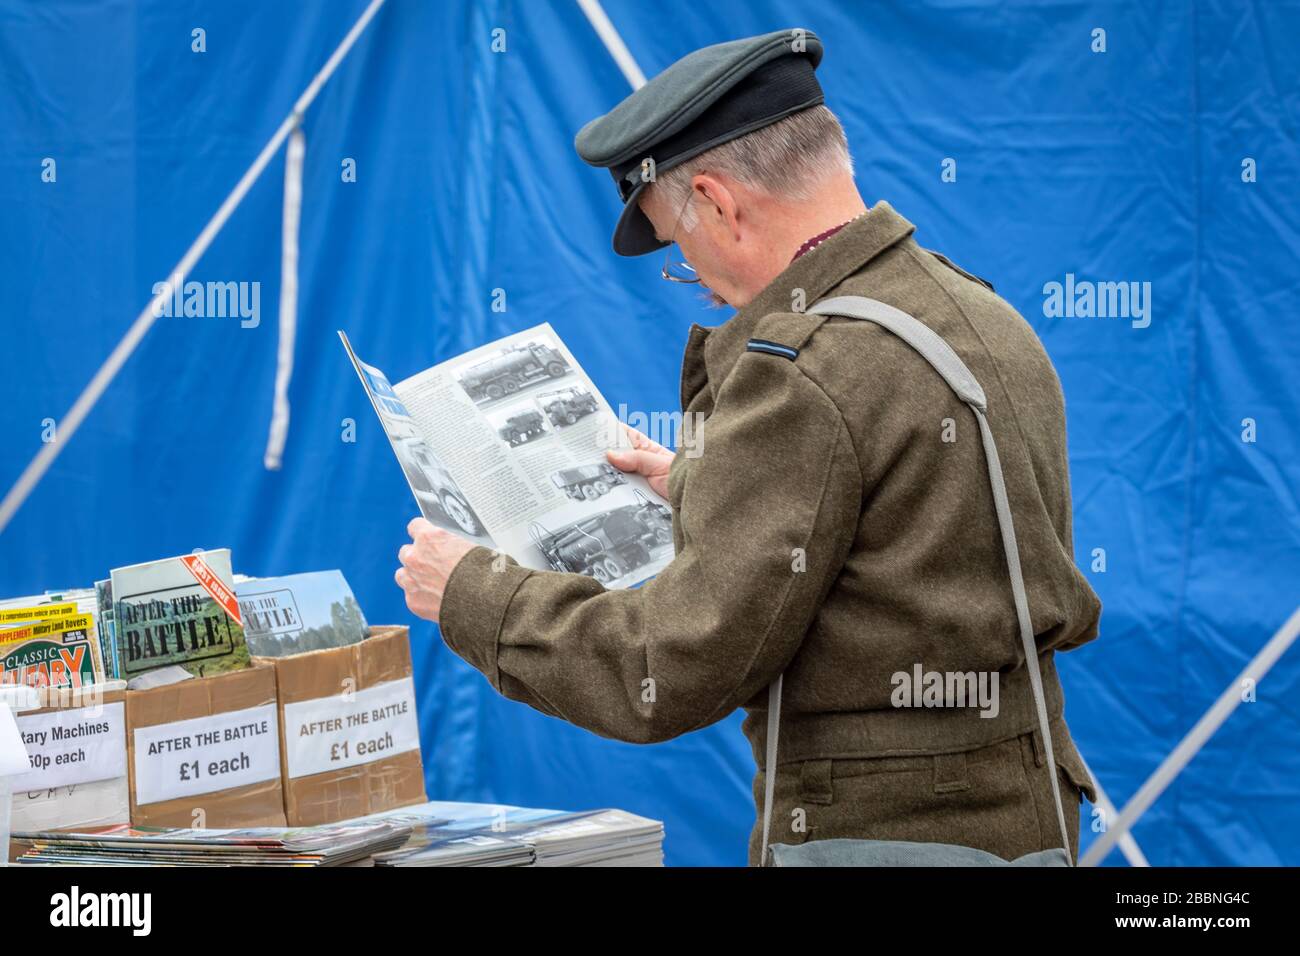 An airman 'checks the facts' during the Daks over Normandy event at IWM Duxford, Duxford Airfield, Cambridgeshire, UK Stock Photo